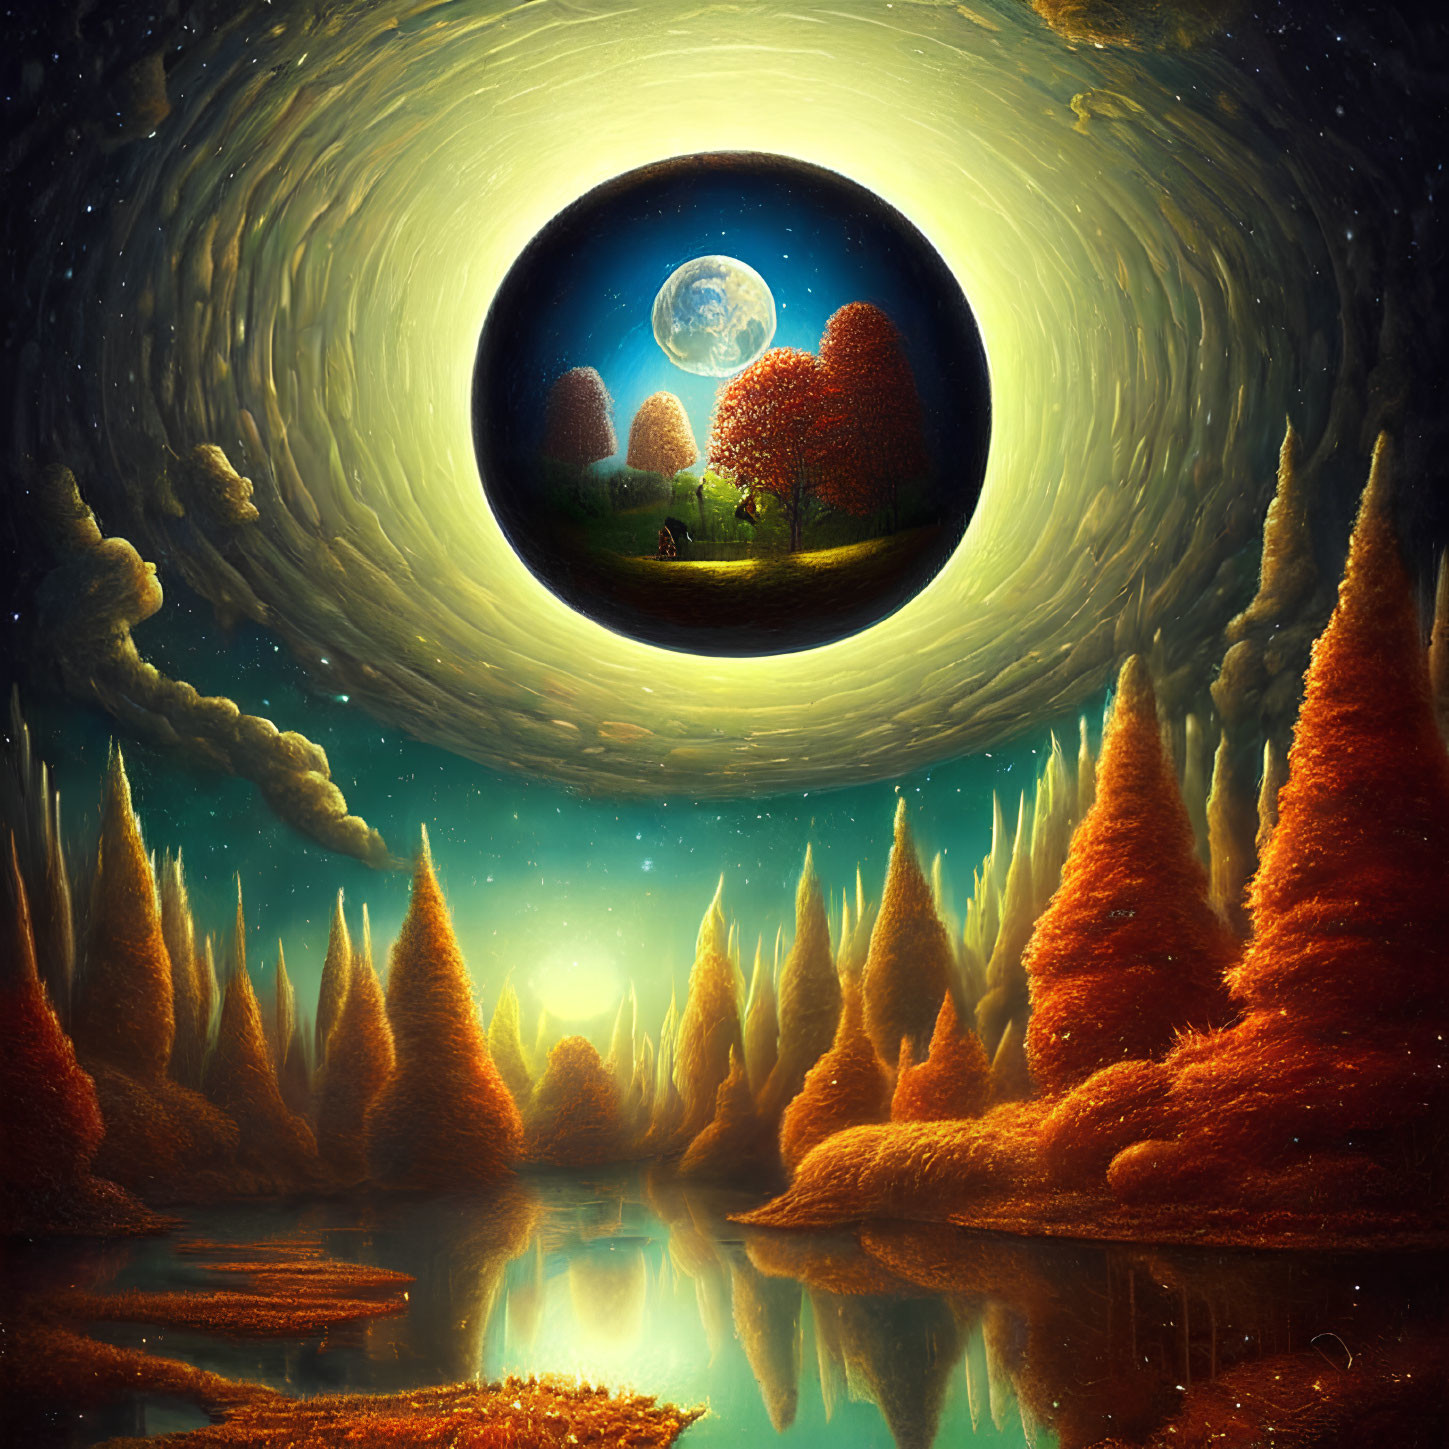 Surreal autumn landscape with moonlit sky reflecting in water